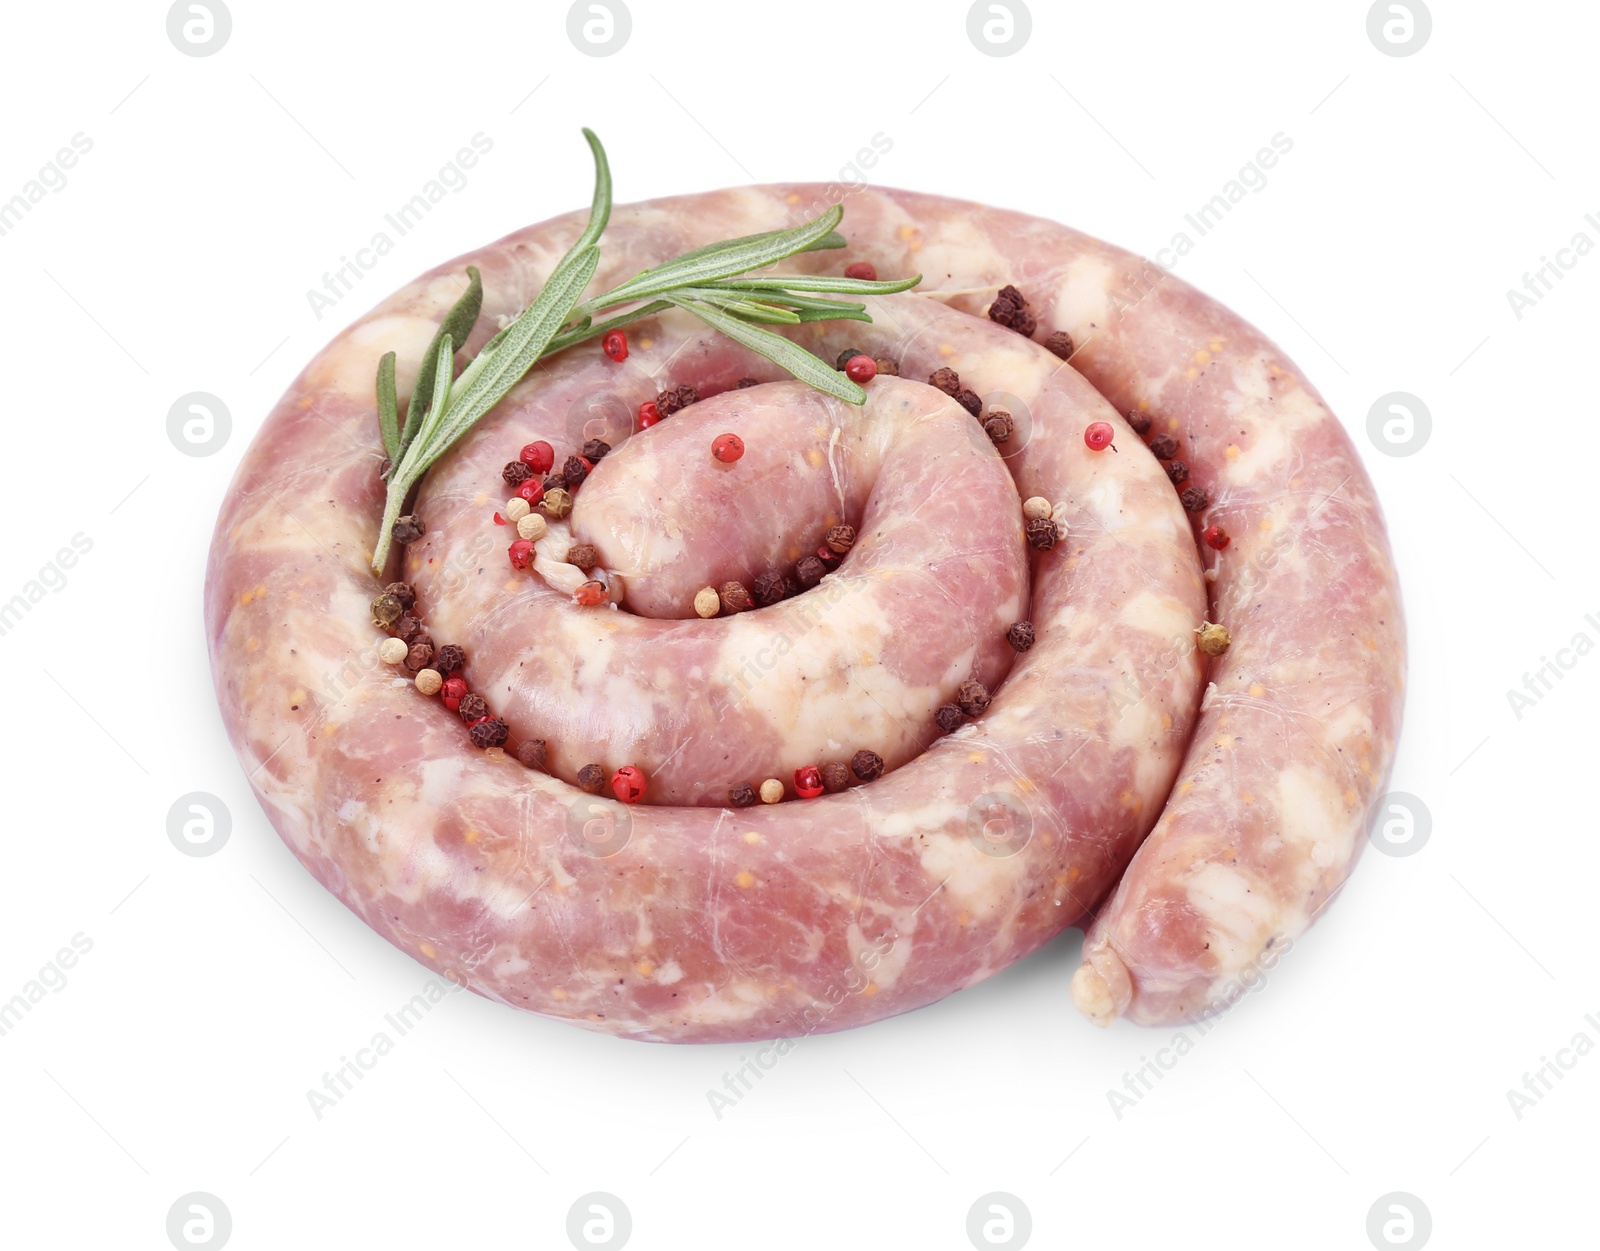 Photo of Homemade sausage, rosemary and spices isolated on white